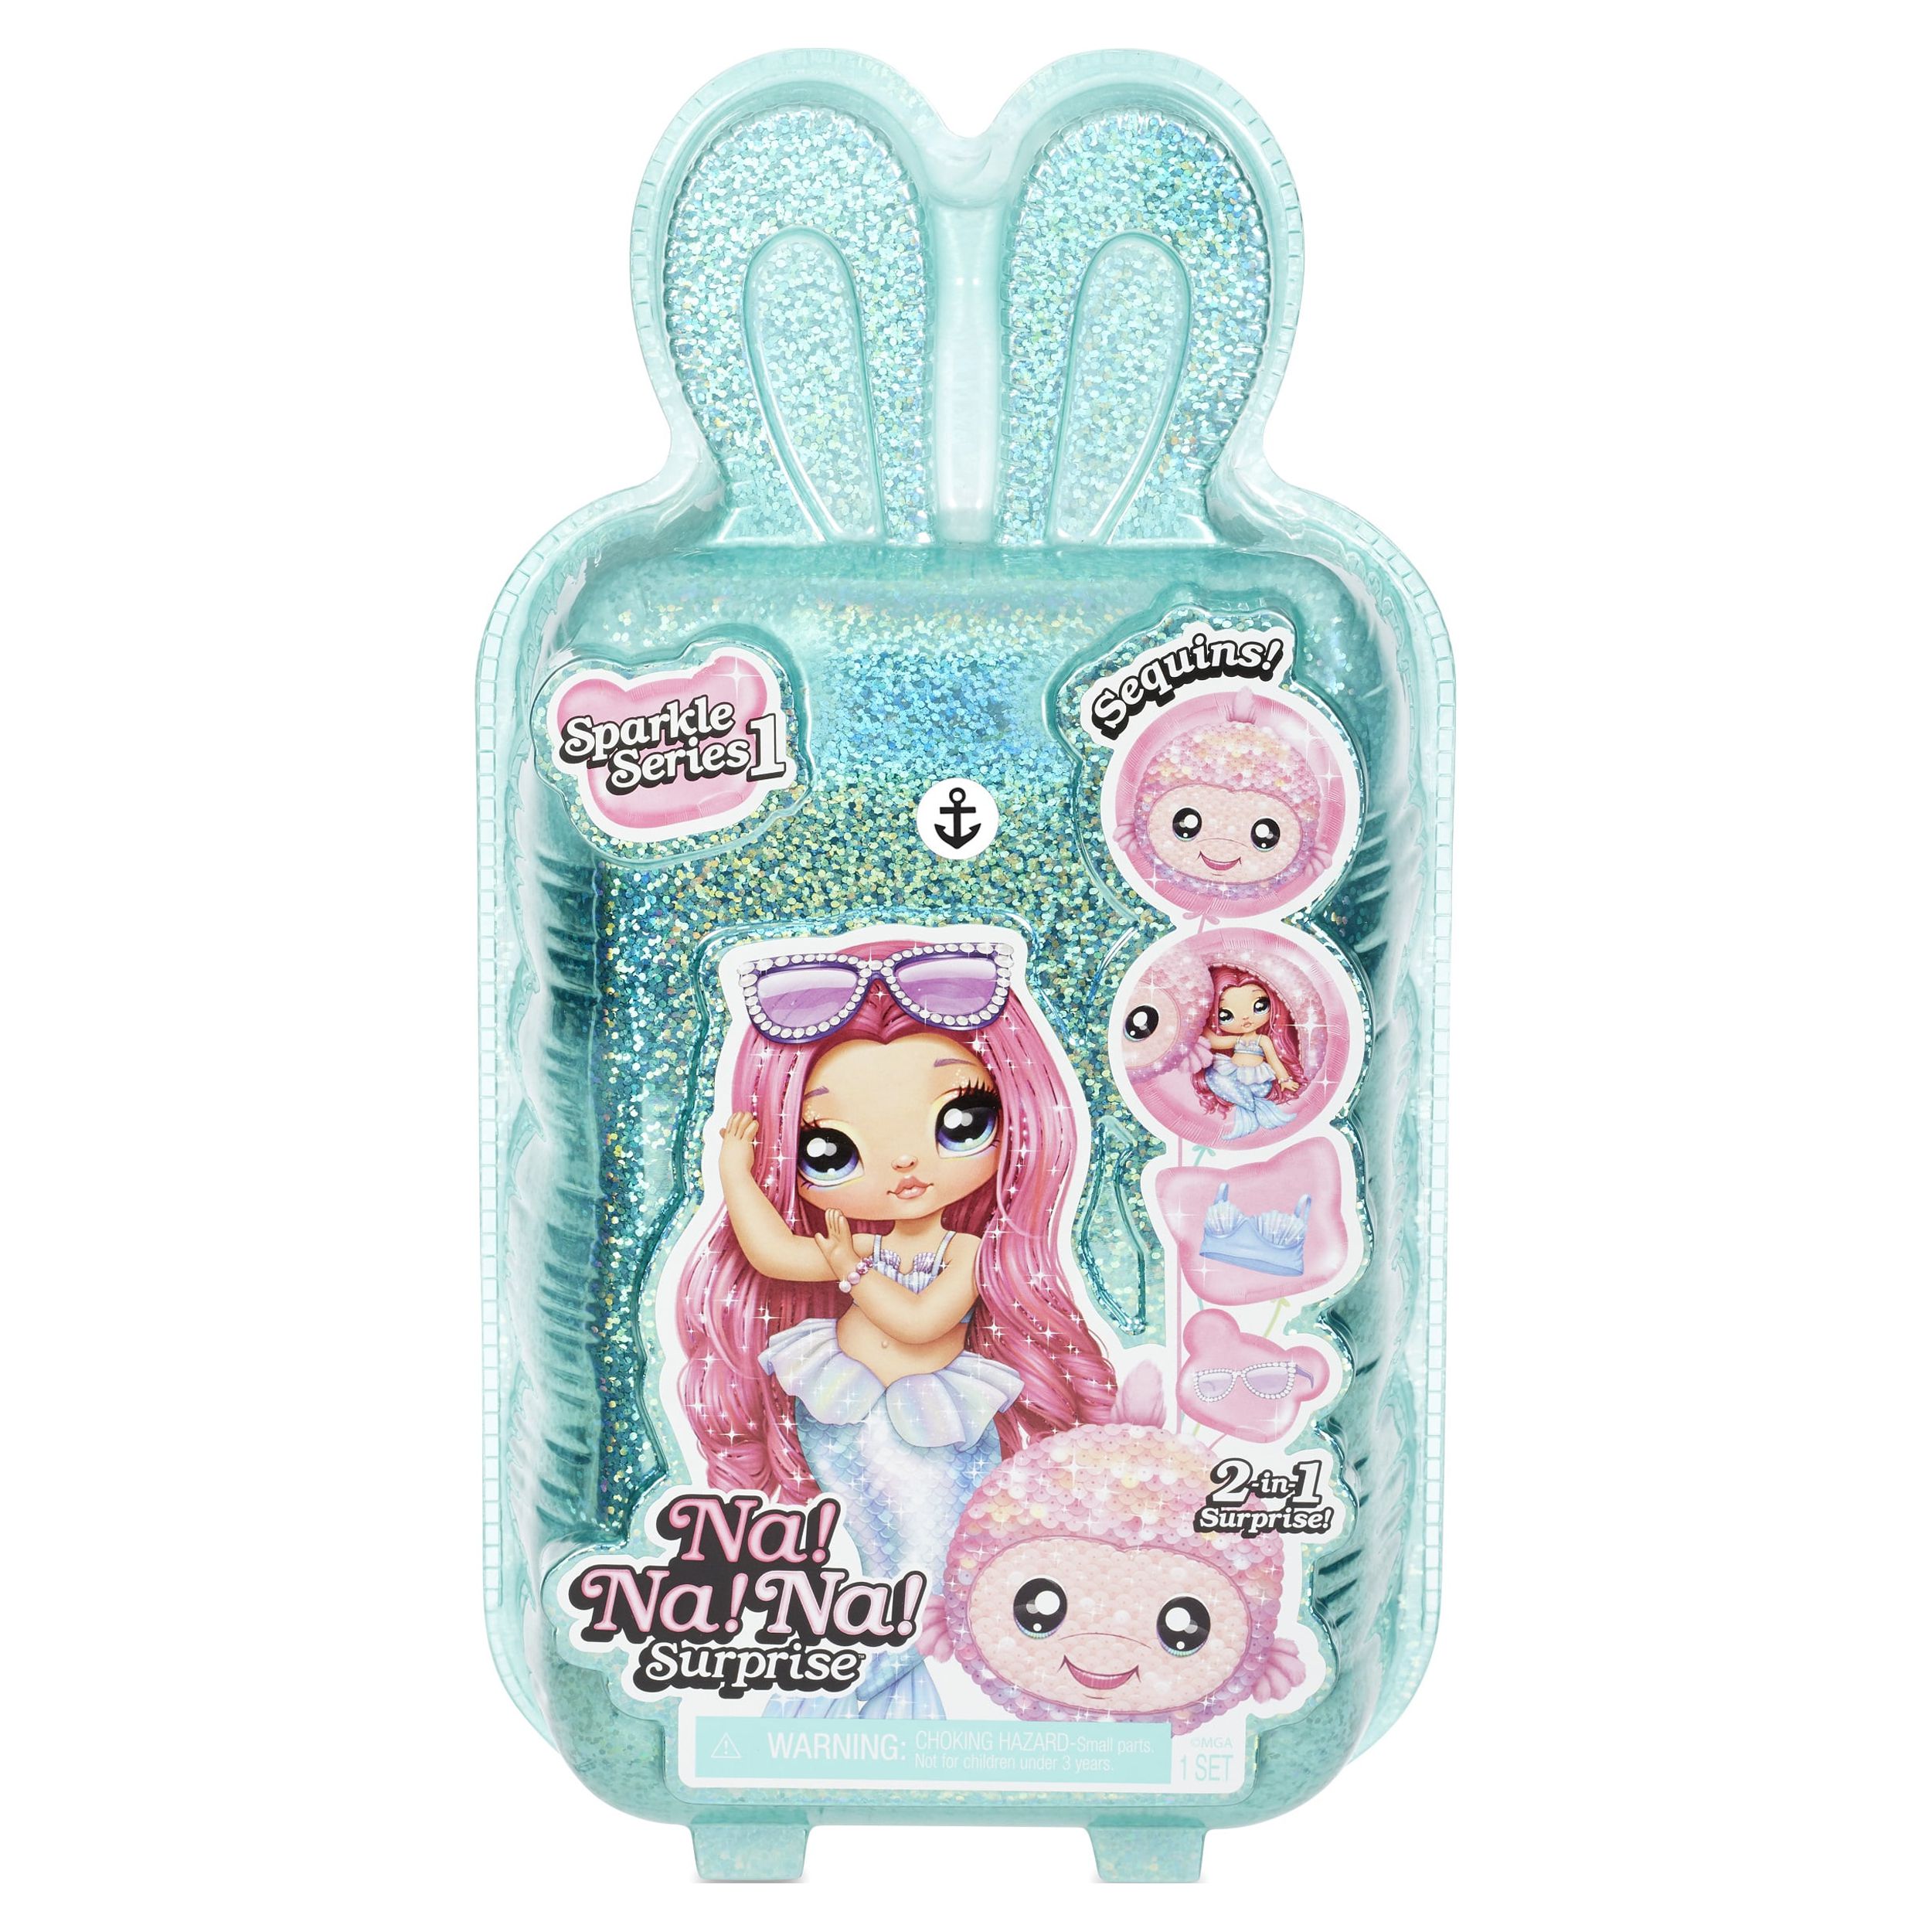 Na! Na! Na! Surprise 2-in-1 Fashion Doll and Sparkly Sequined Purse Sparkle Series – Sailor Blu, 7.5" Sailor Doll - image 5 of 7